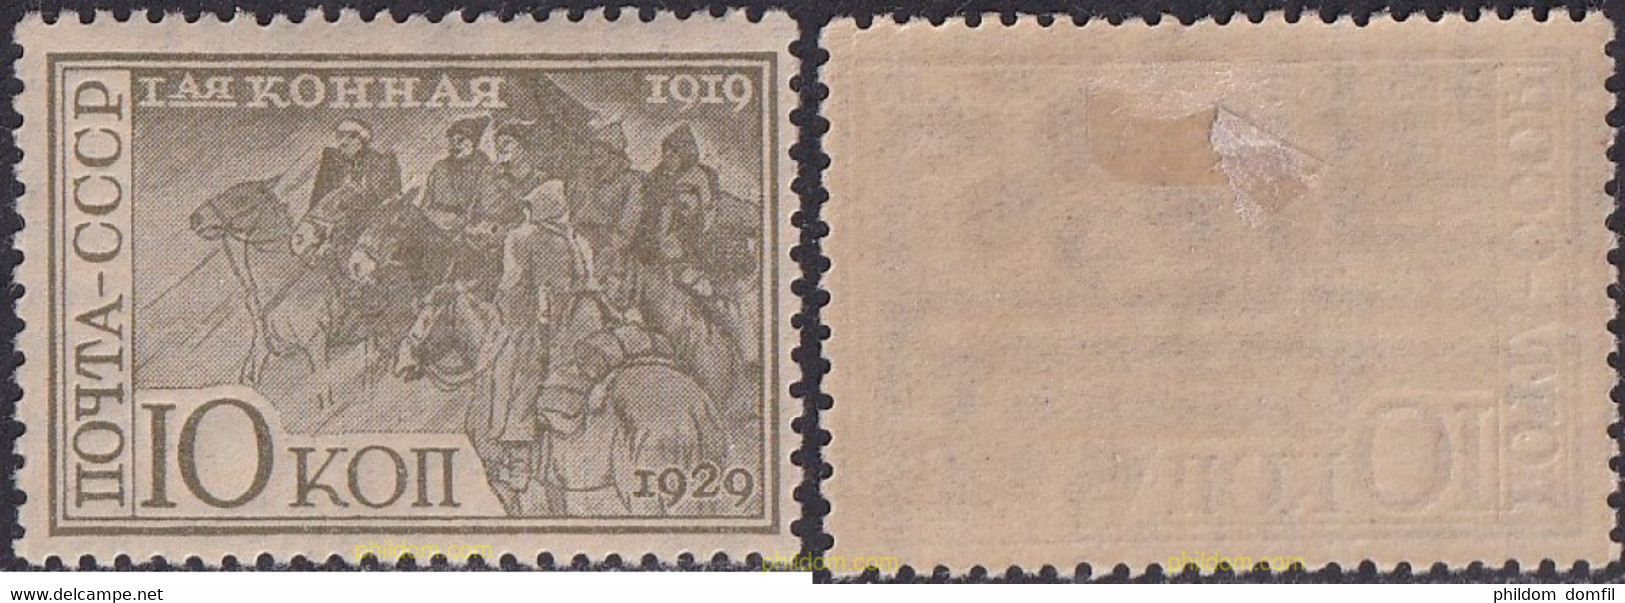 693680 HINGED UNION SOVIETICA 1930 CABALLOS - Collections